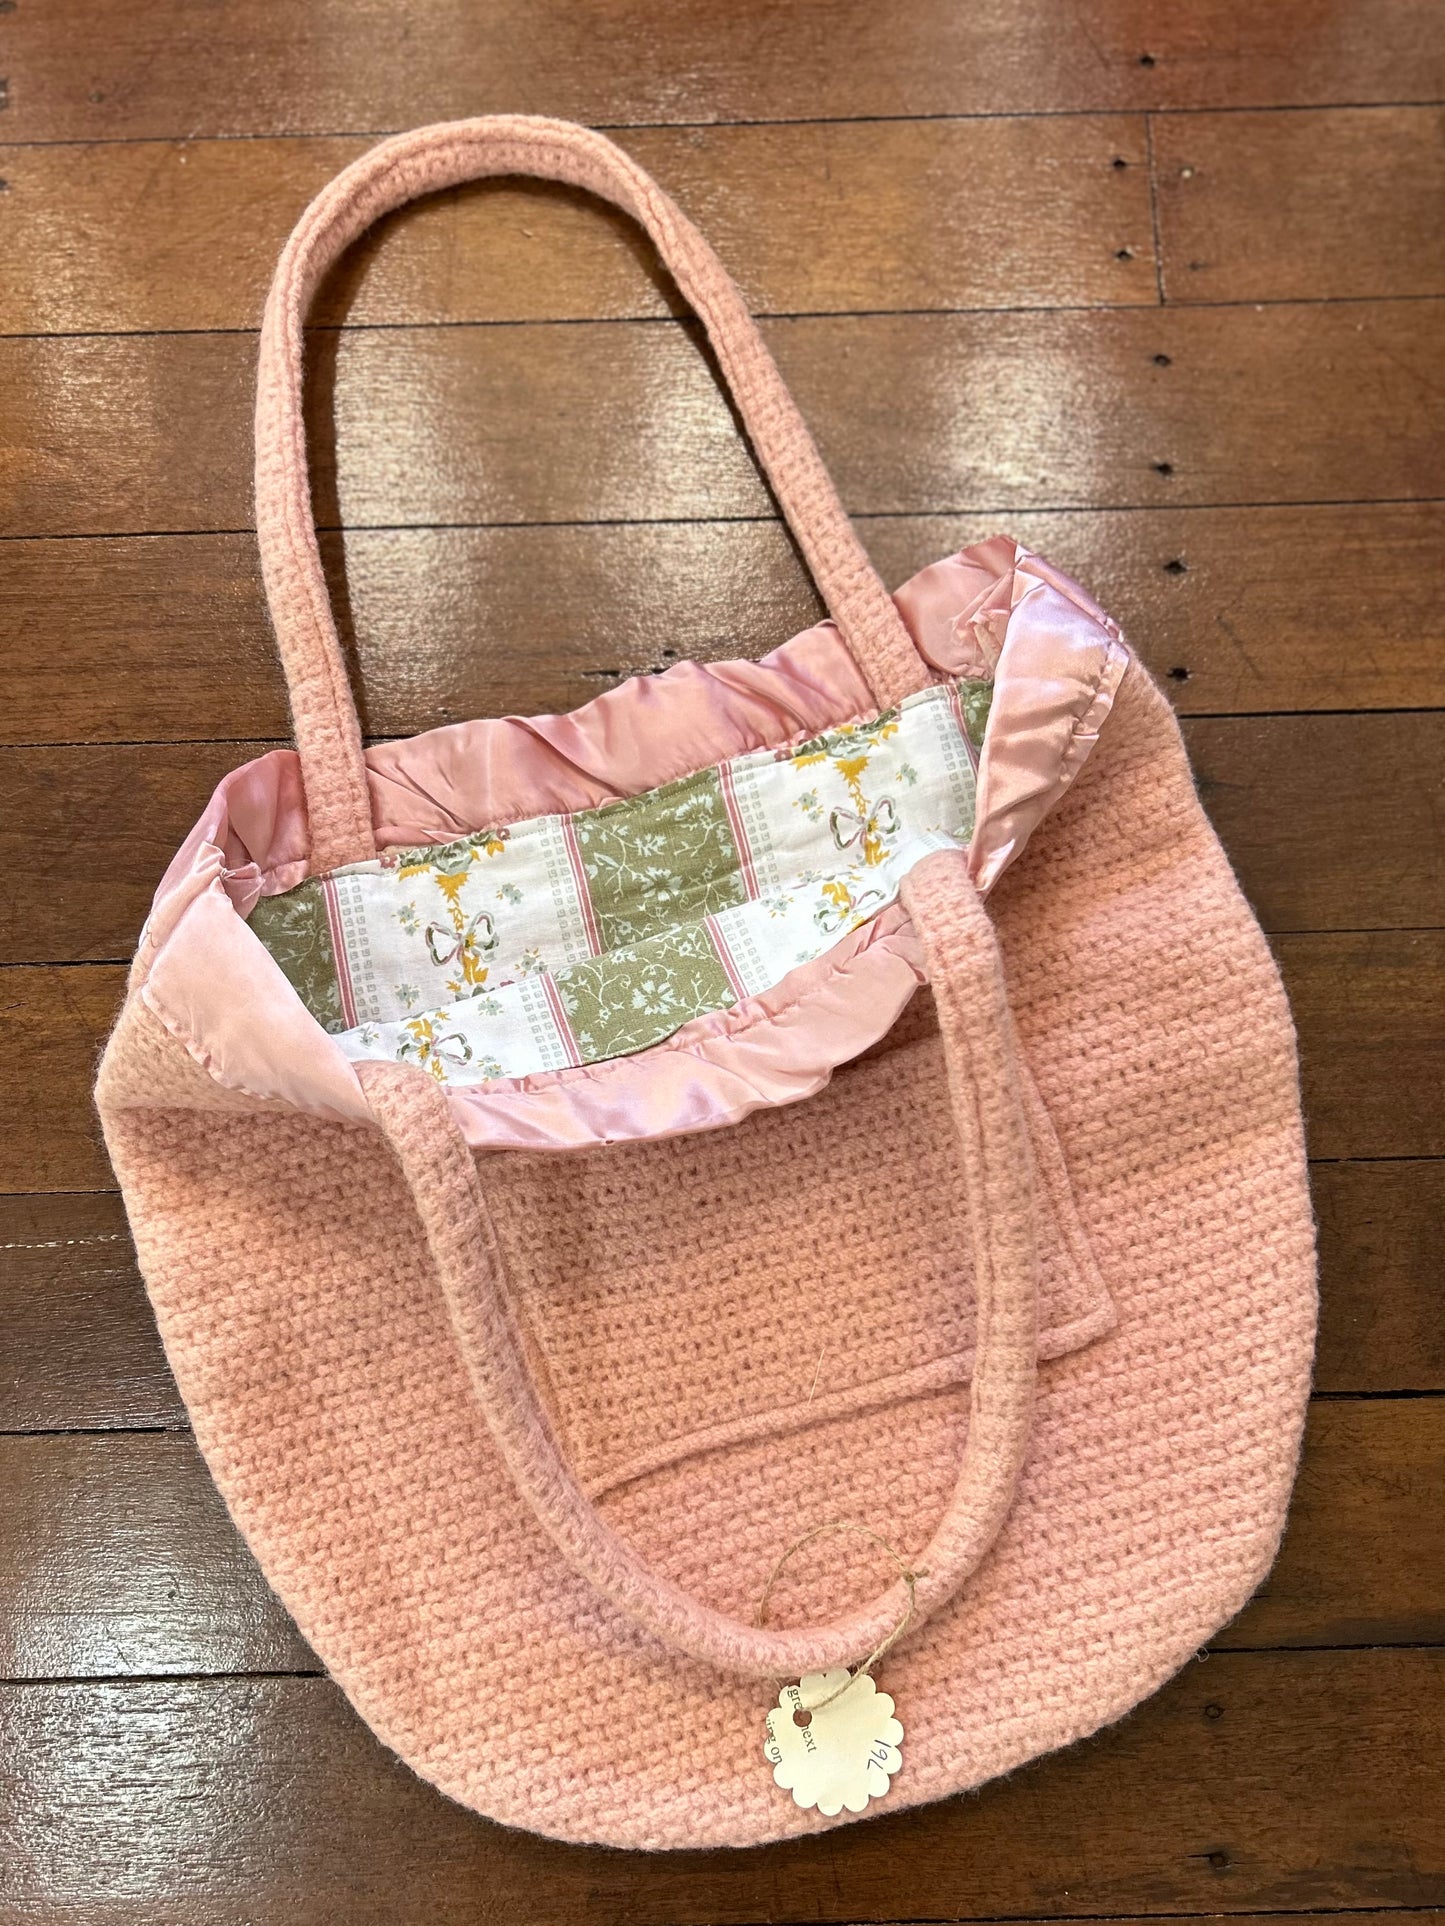 Upcycled Wool Tressie Bags